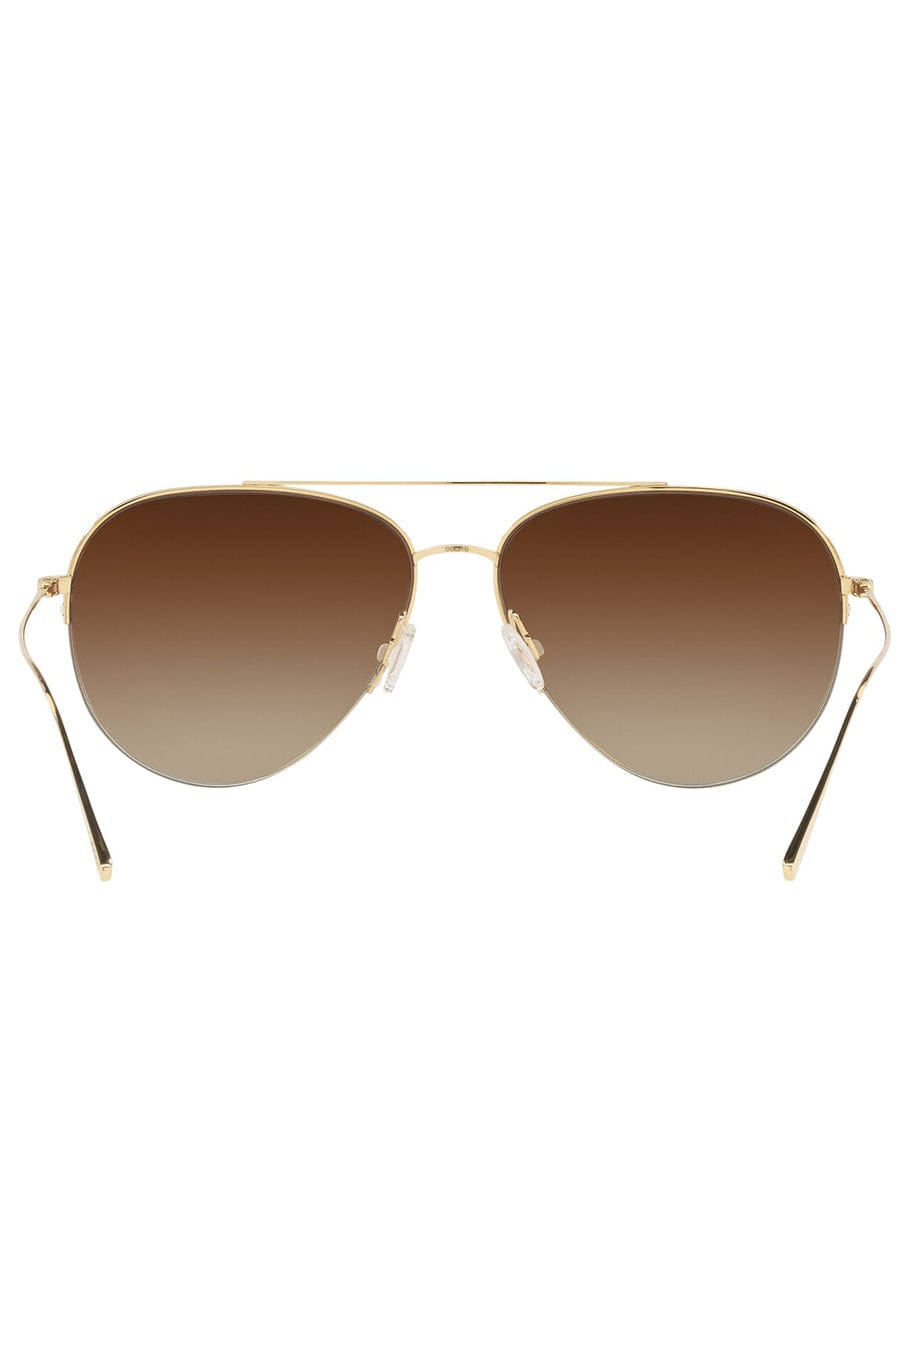 OLIVER PEOPLES-Cleamons Sunglasses-GOLD BROWN